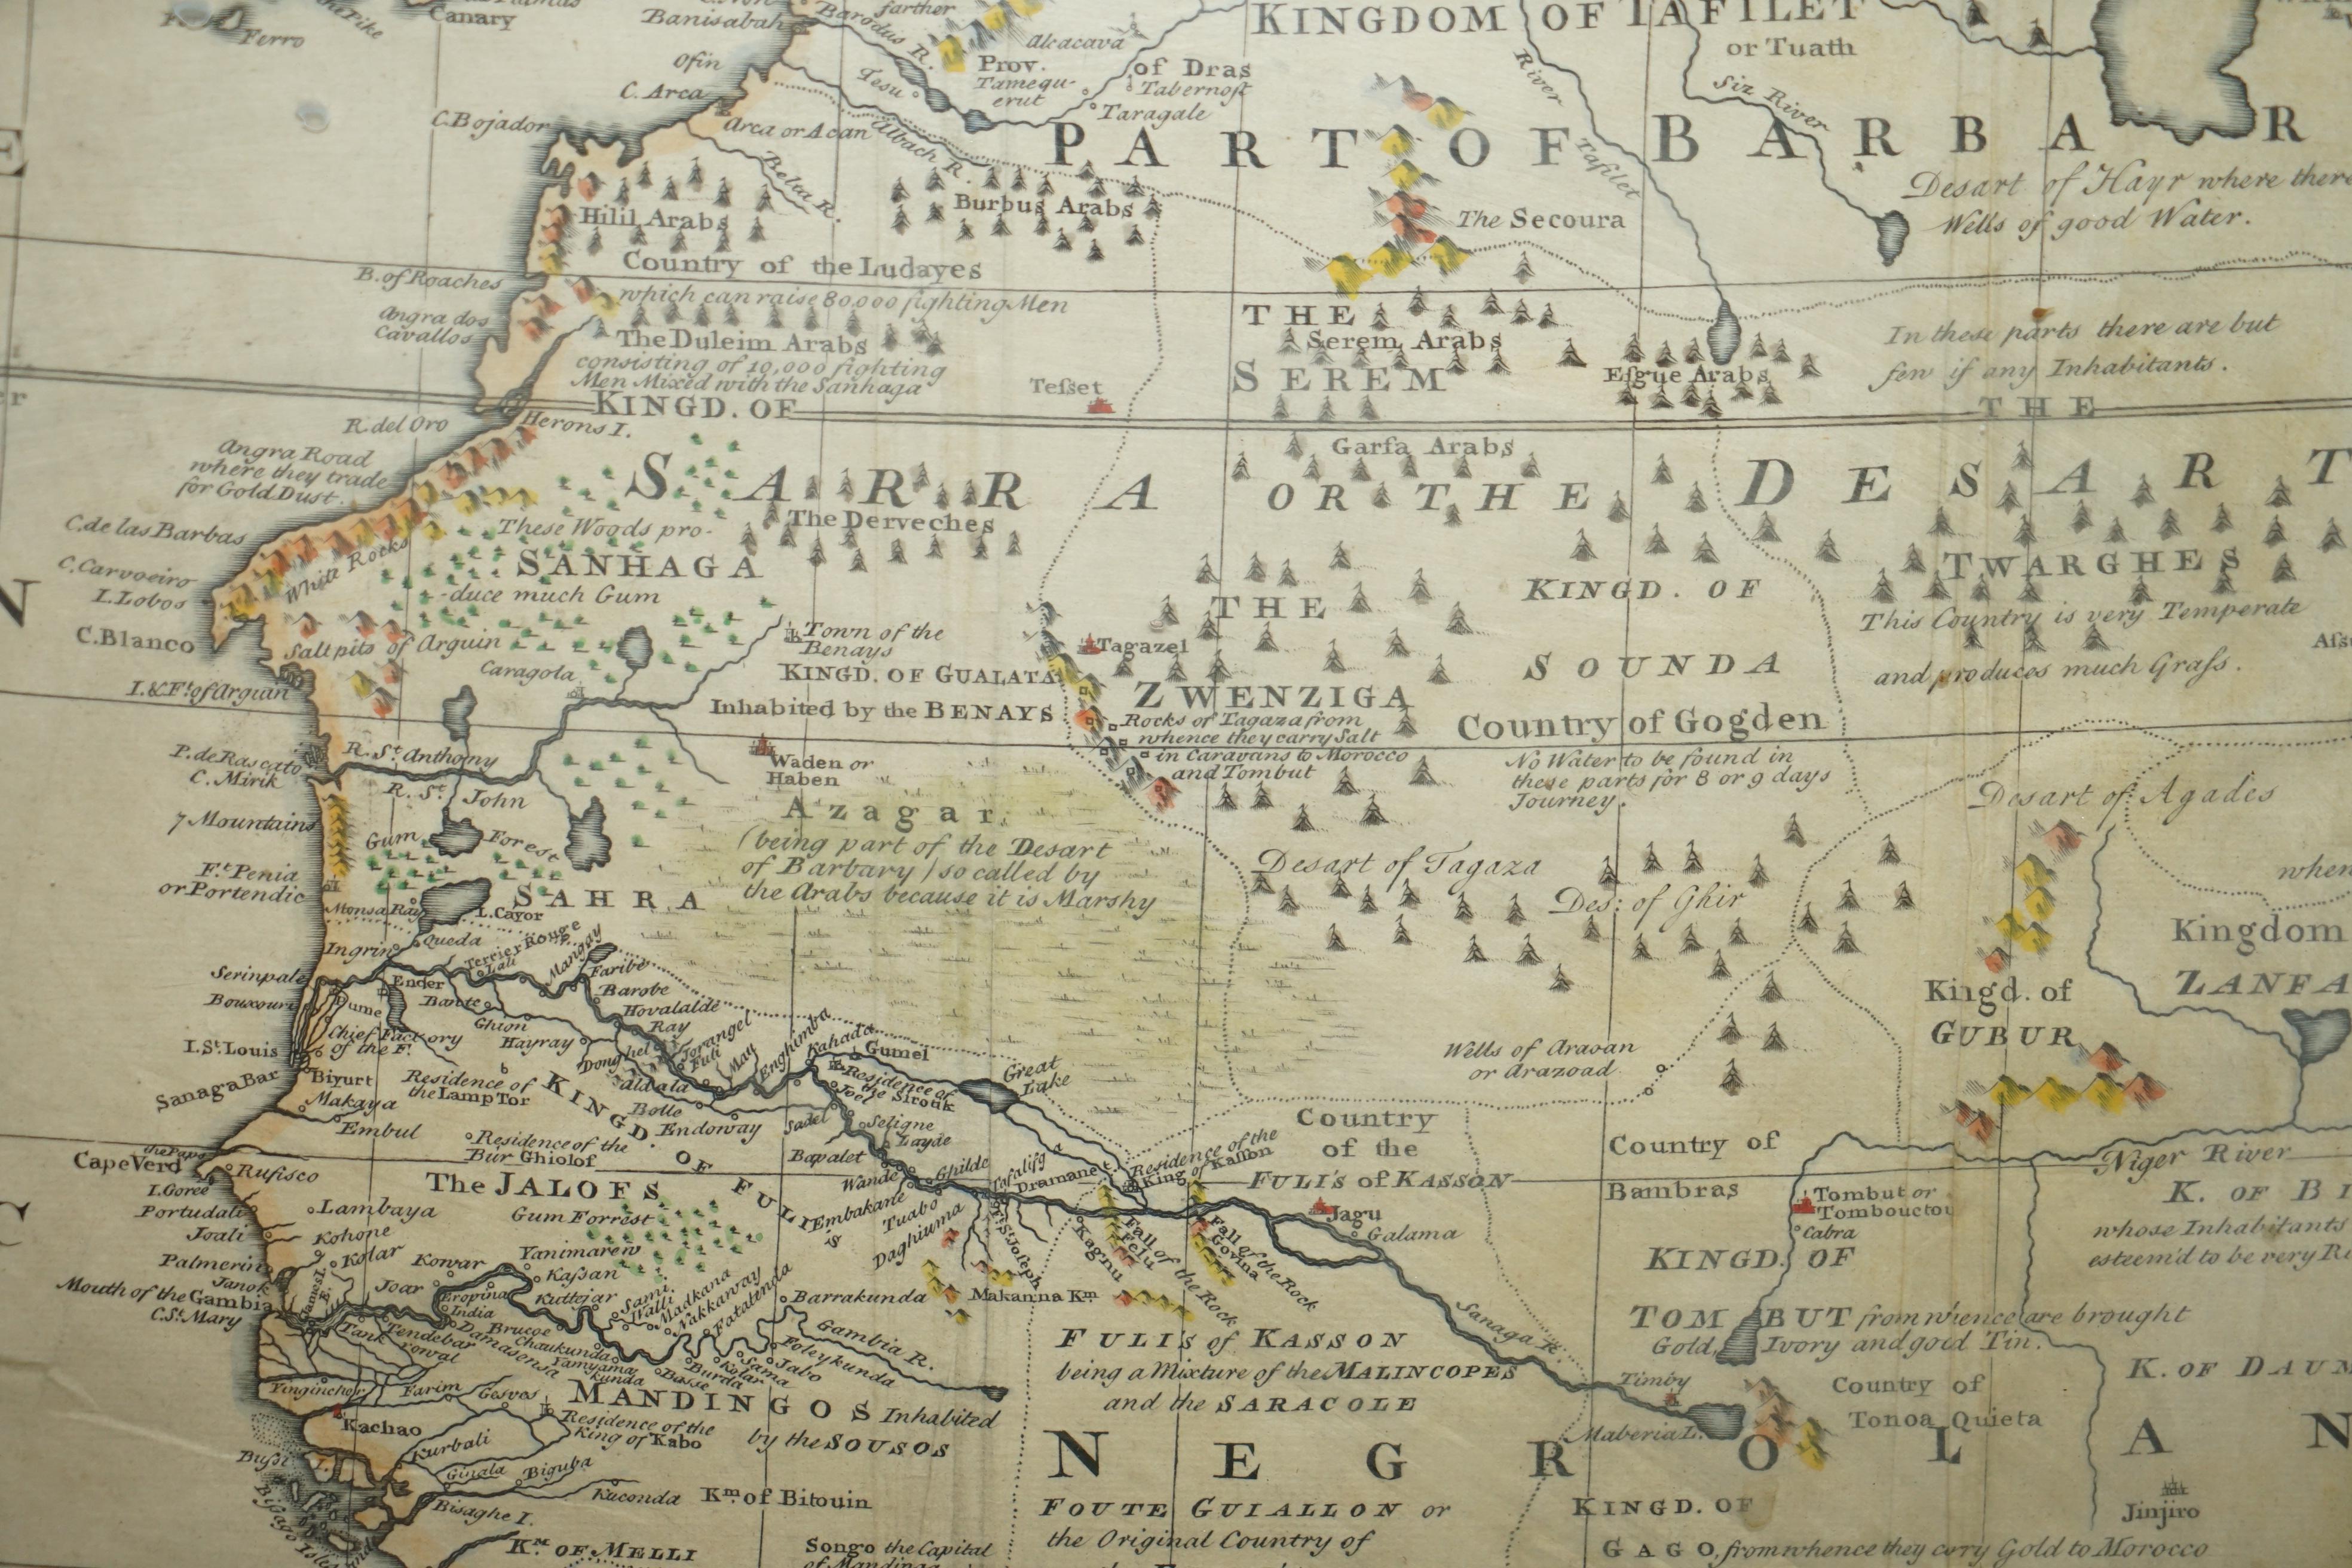 Oak 1747 British Map Showing the Kingdom of Judah on the West Coast of Africa